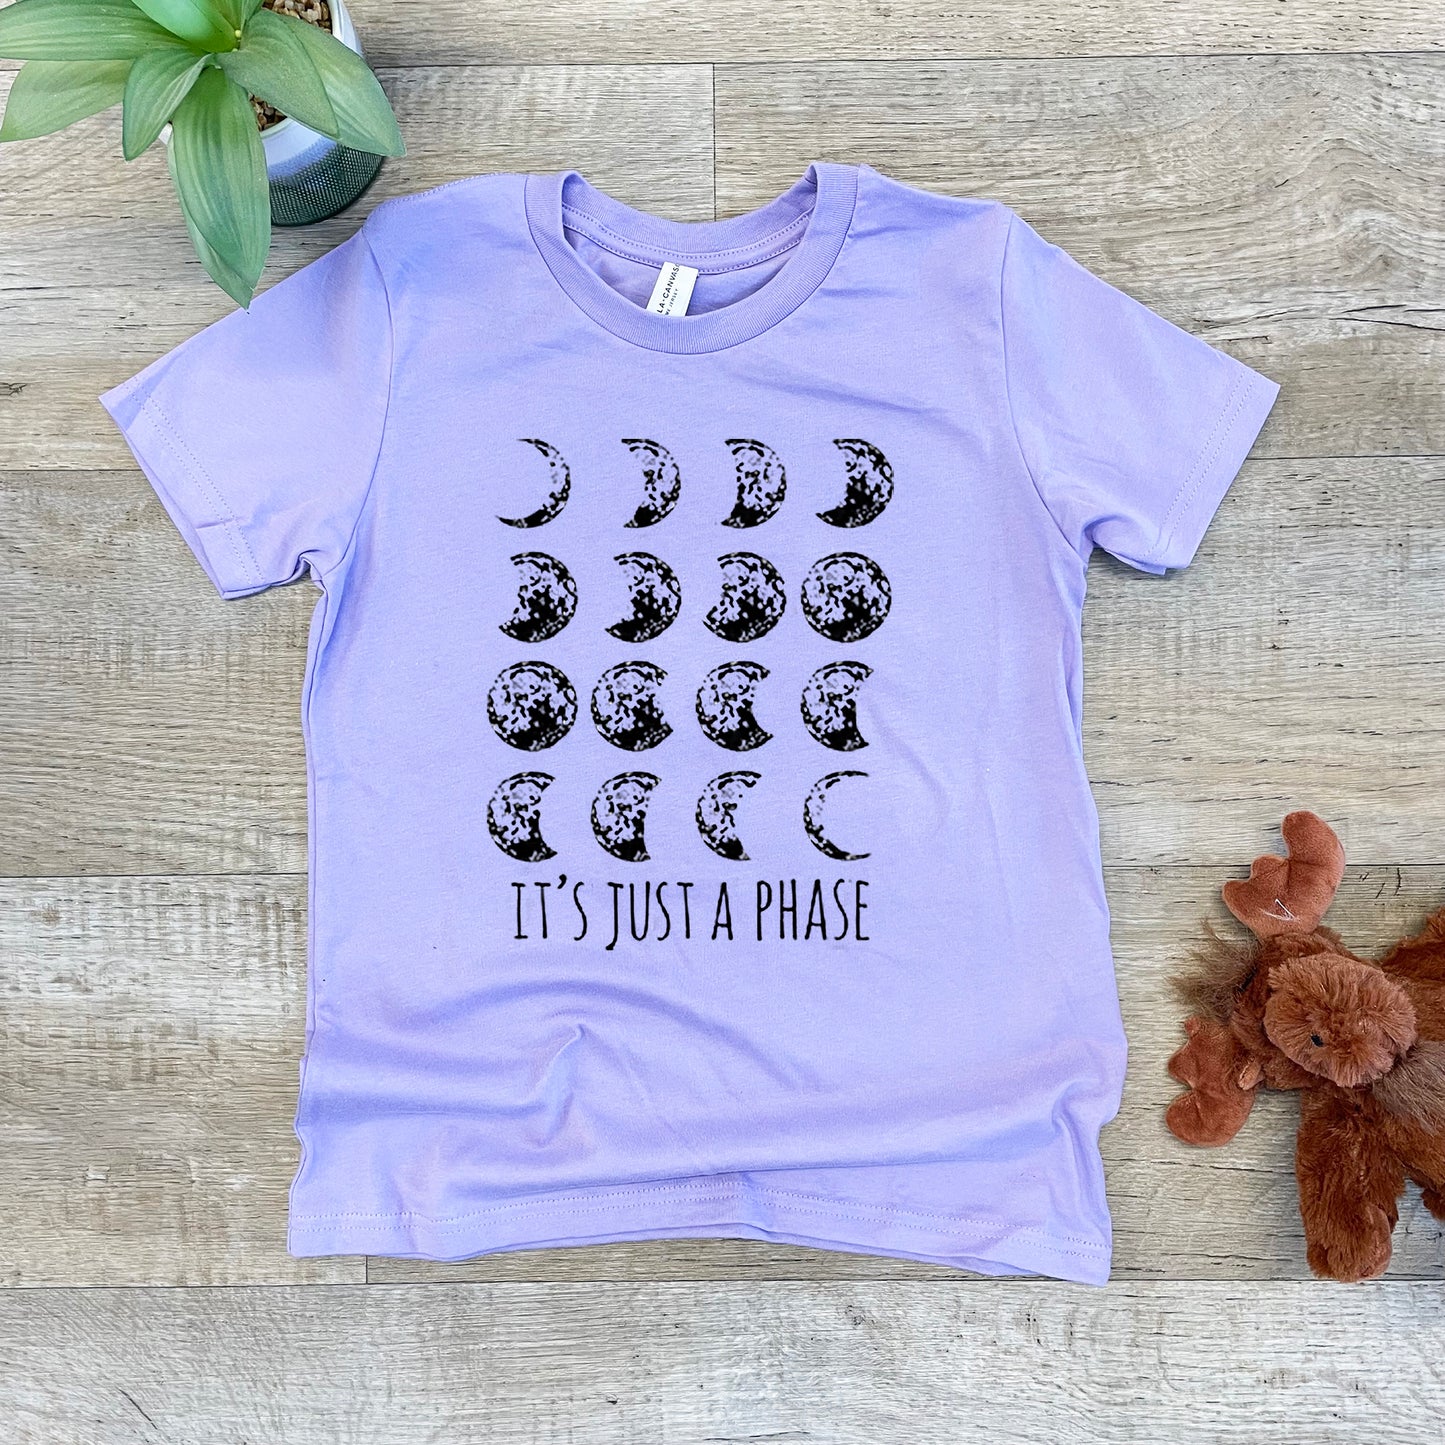 It's Just A Phase - Moon - Kid's Tee - Columbia Blue or Lavender